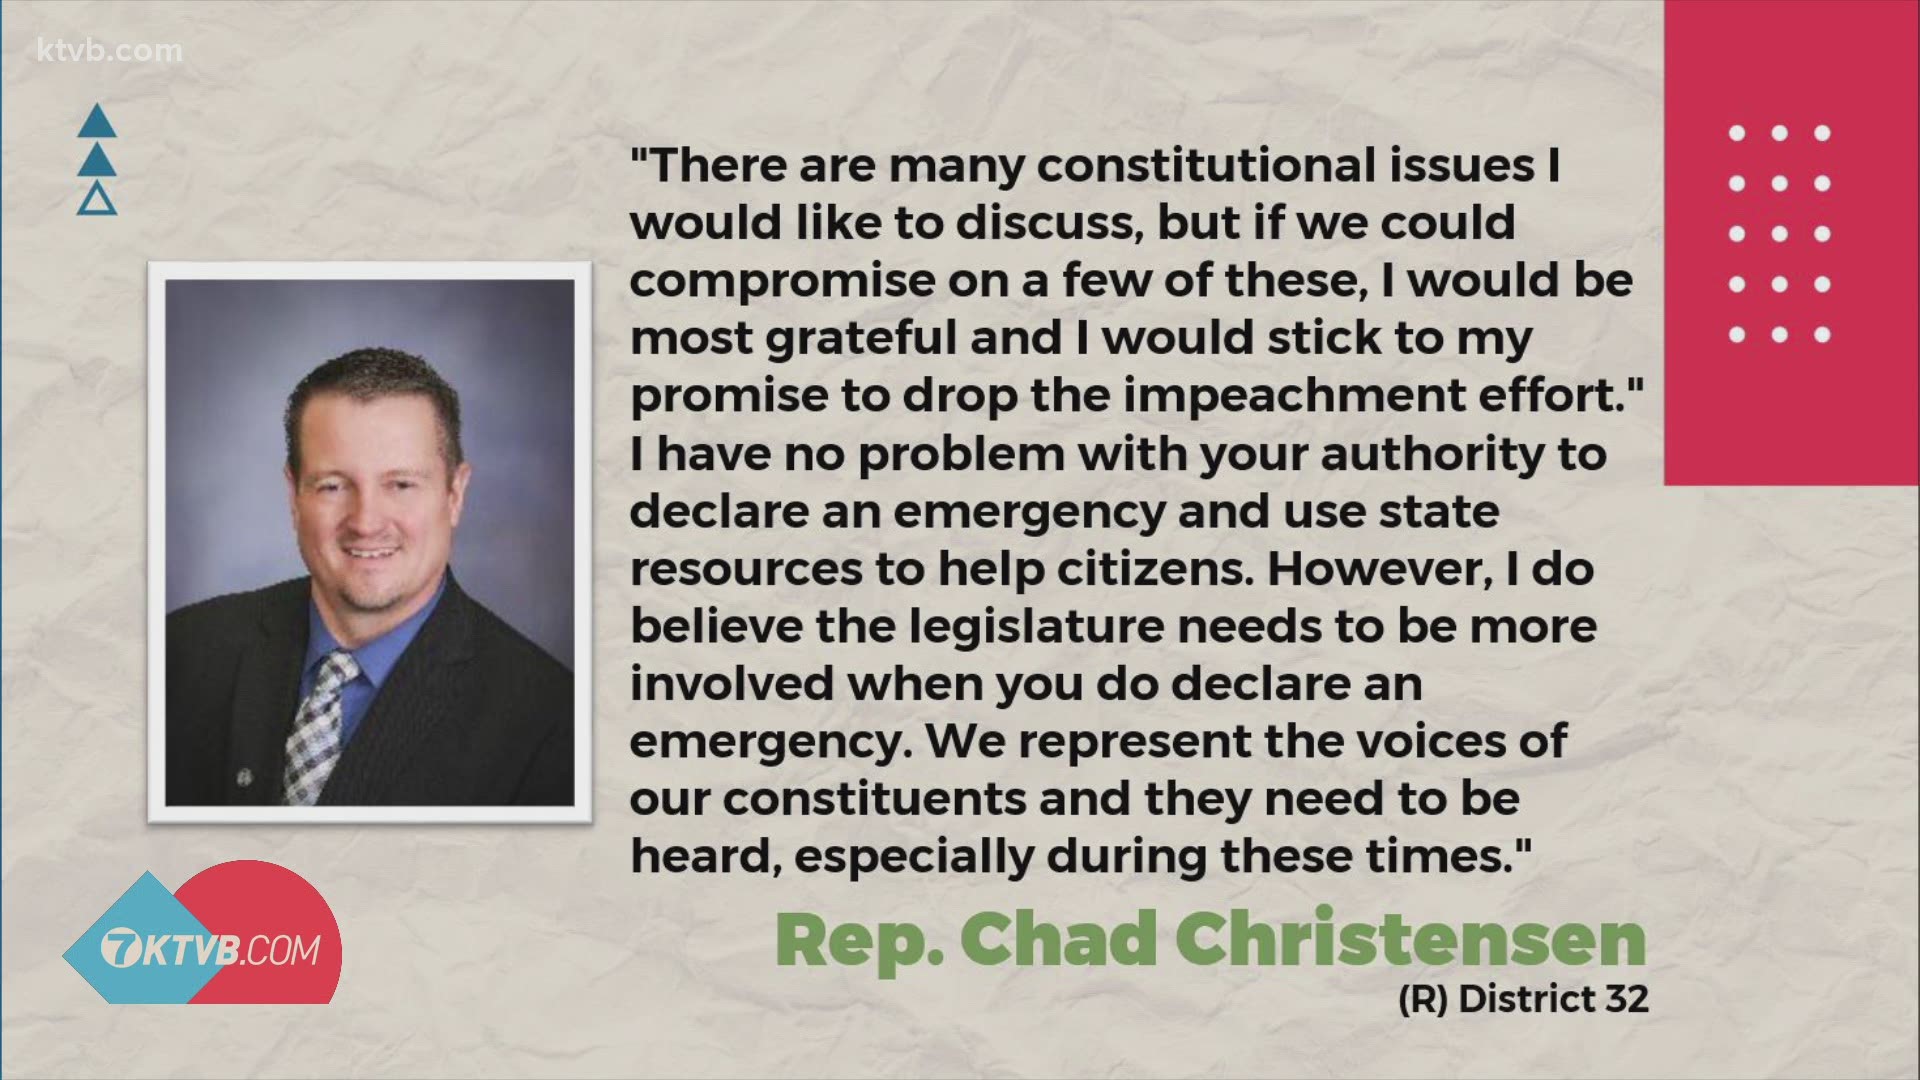 Rep. Chad Christensen said he knew the impeachment plan did not stand a chance and that he just wanted to point out the unconstitutionality of the stay-home order